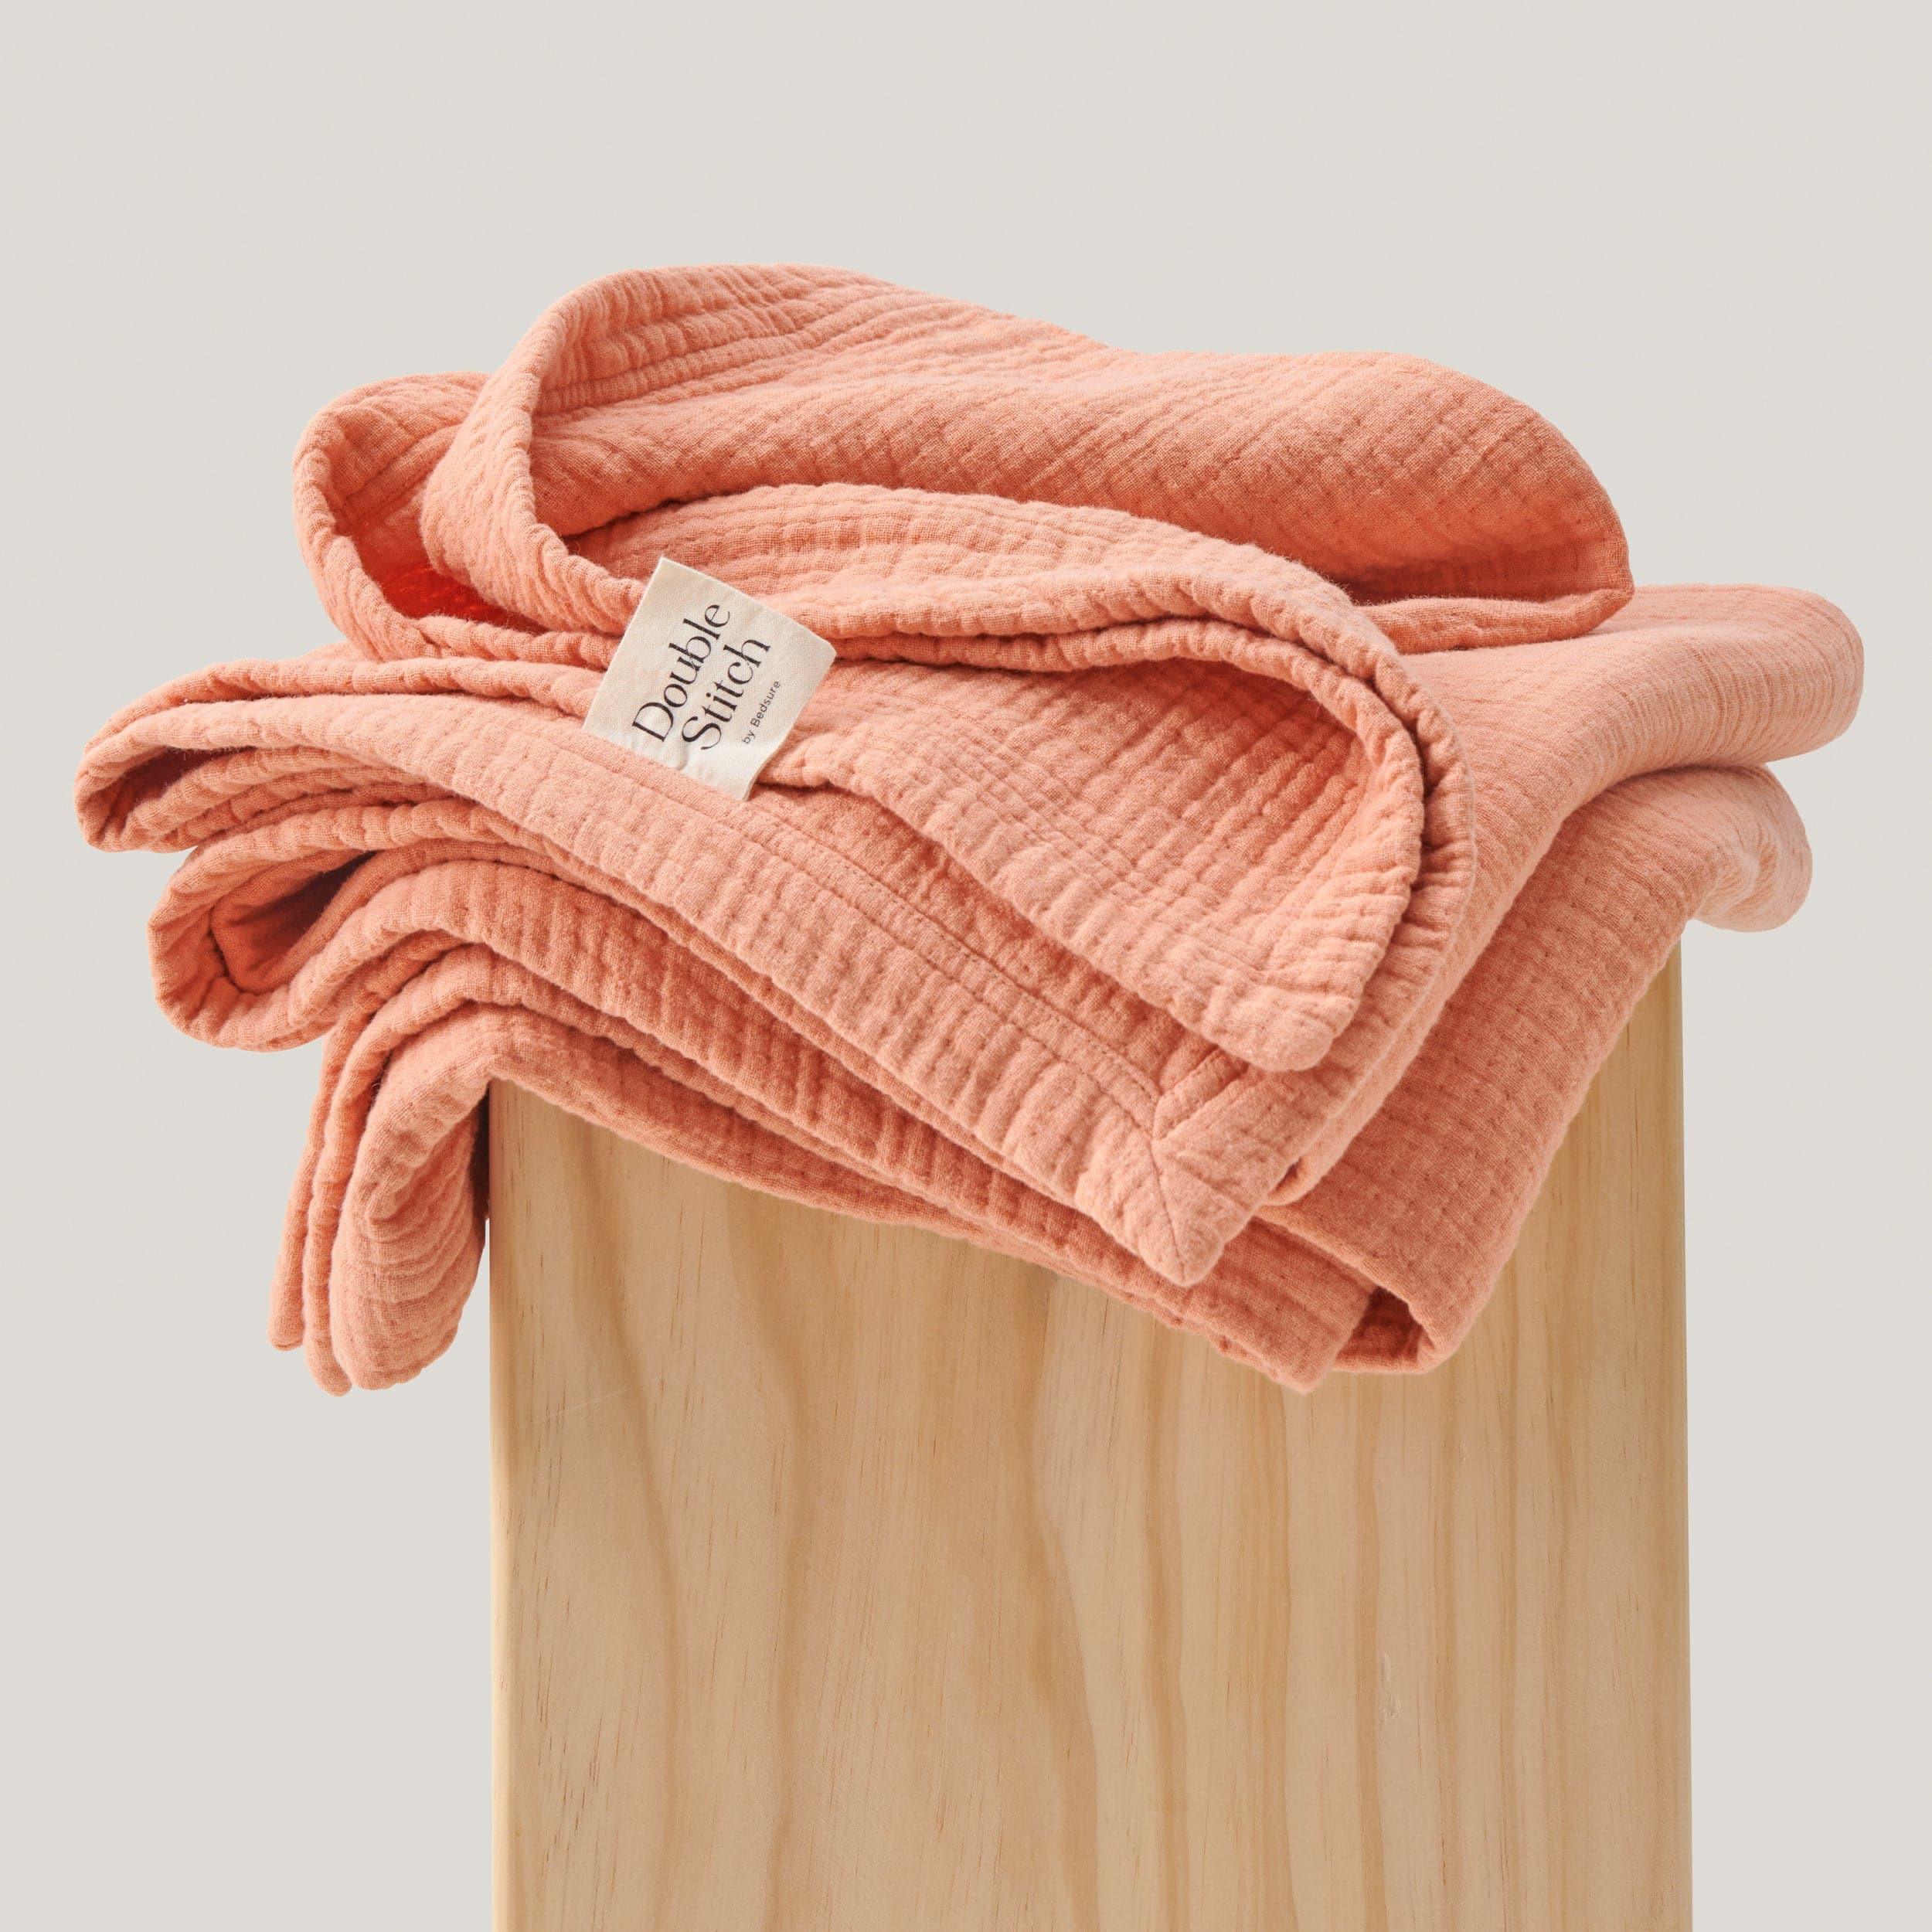 The soft texture of a cotton throw blanket makes it perfect for snuggling up on a chilly evening.